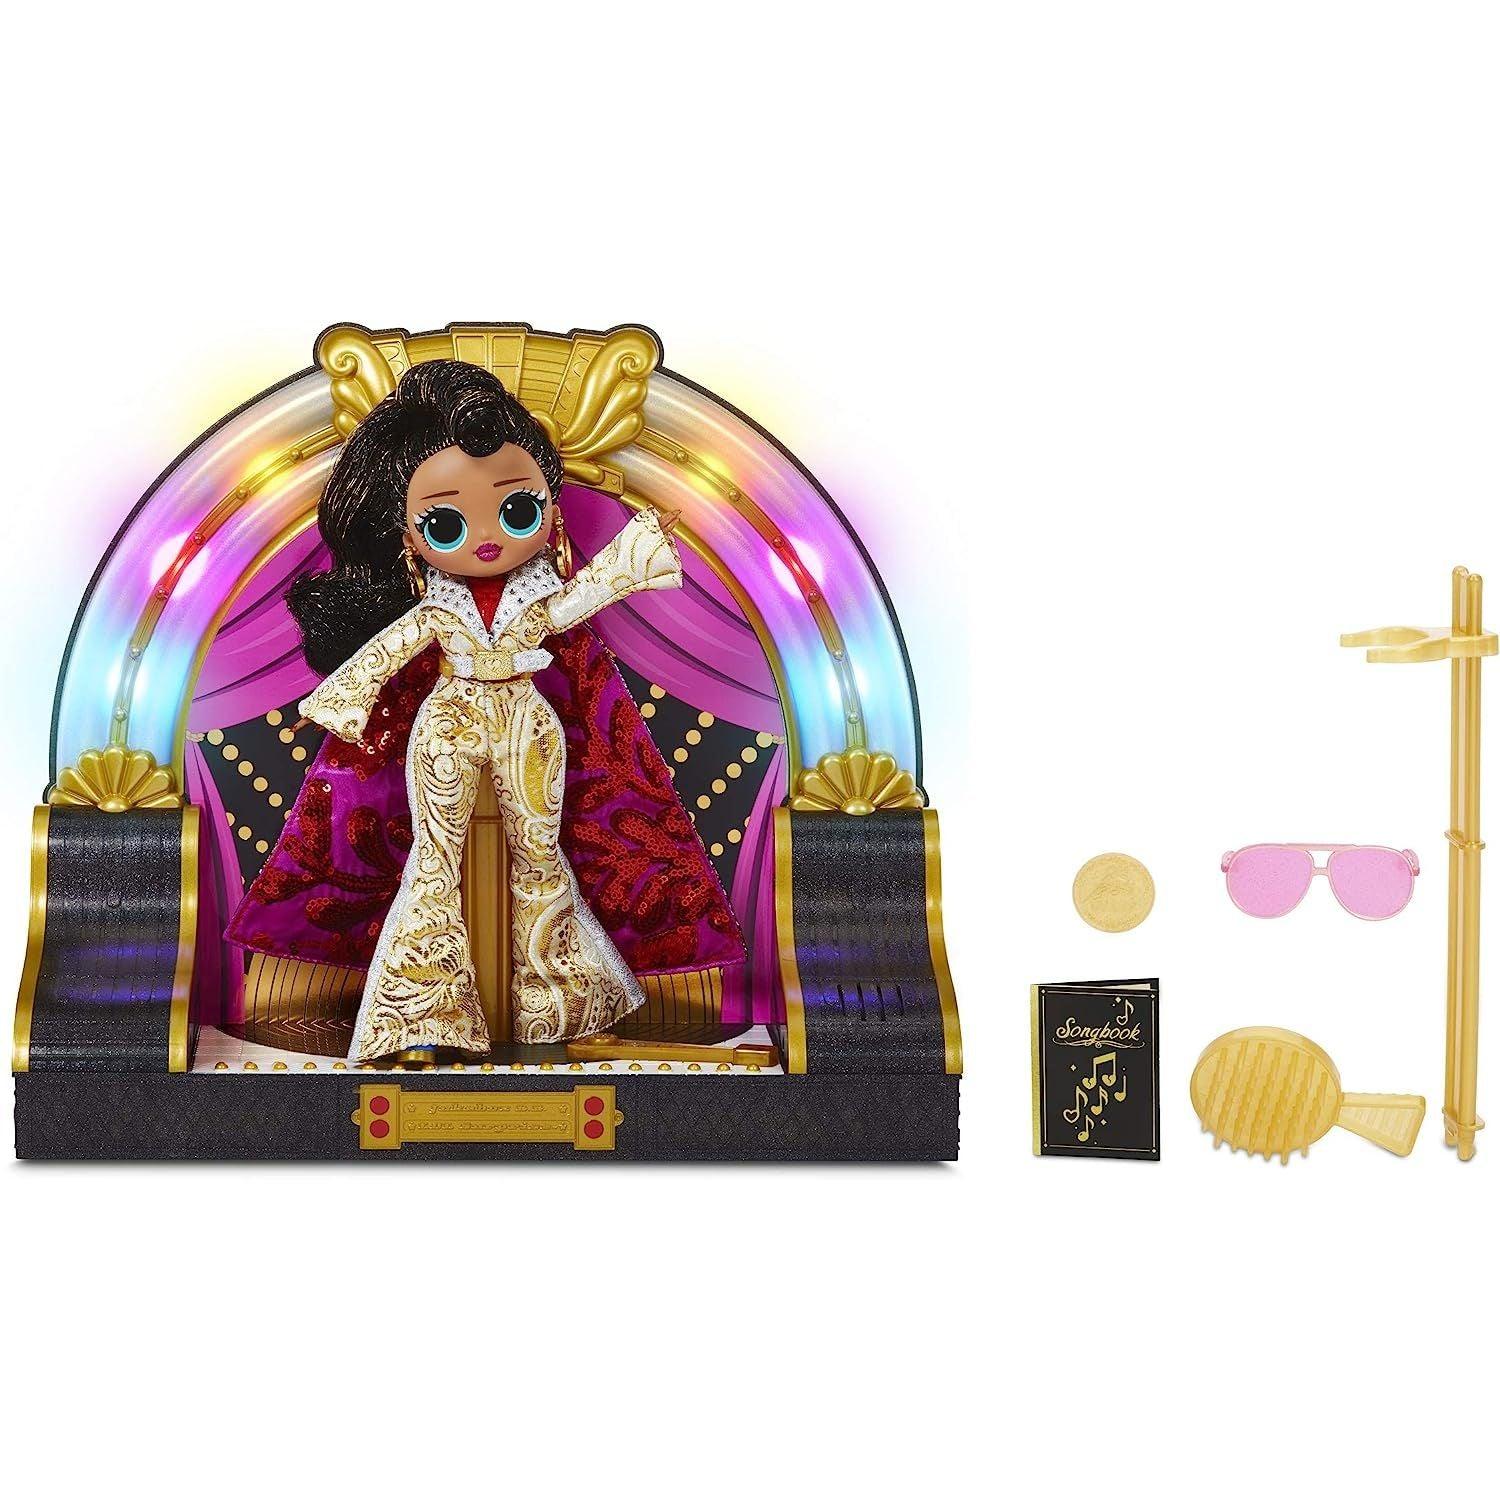 L.O.L Surprise O.M.G. Remix 2020 Collector Edition Jukebox B.B with Music - BumbleToys - 5-7 Years, Arabic Triangle Trading, Dolls, Fashion Dolls & Accessories, Girls, L.O.L